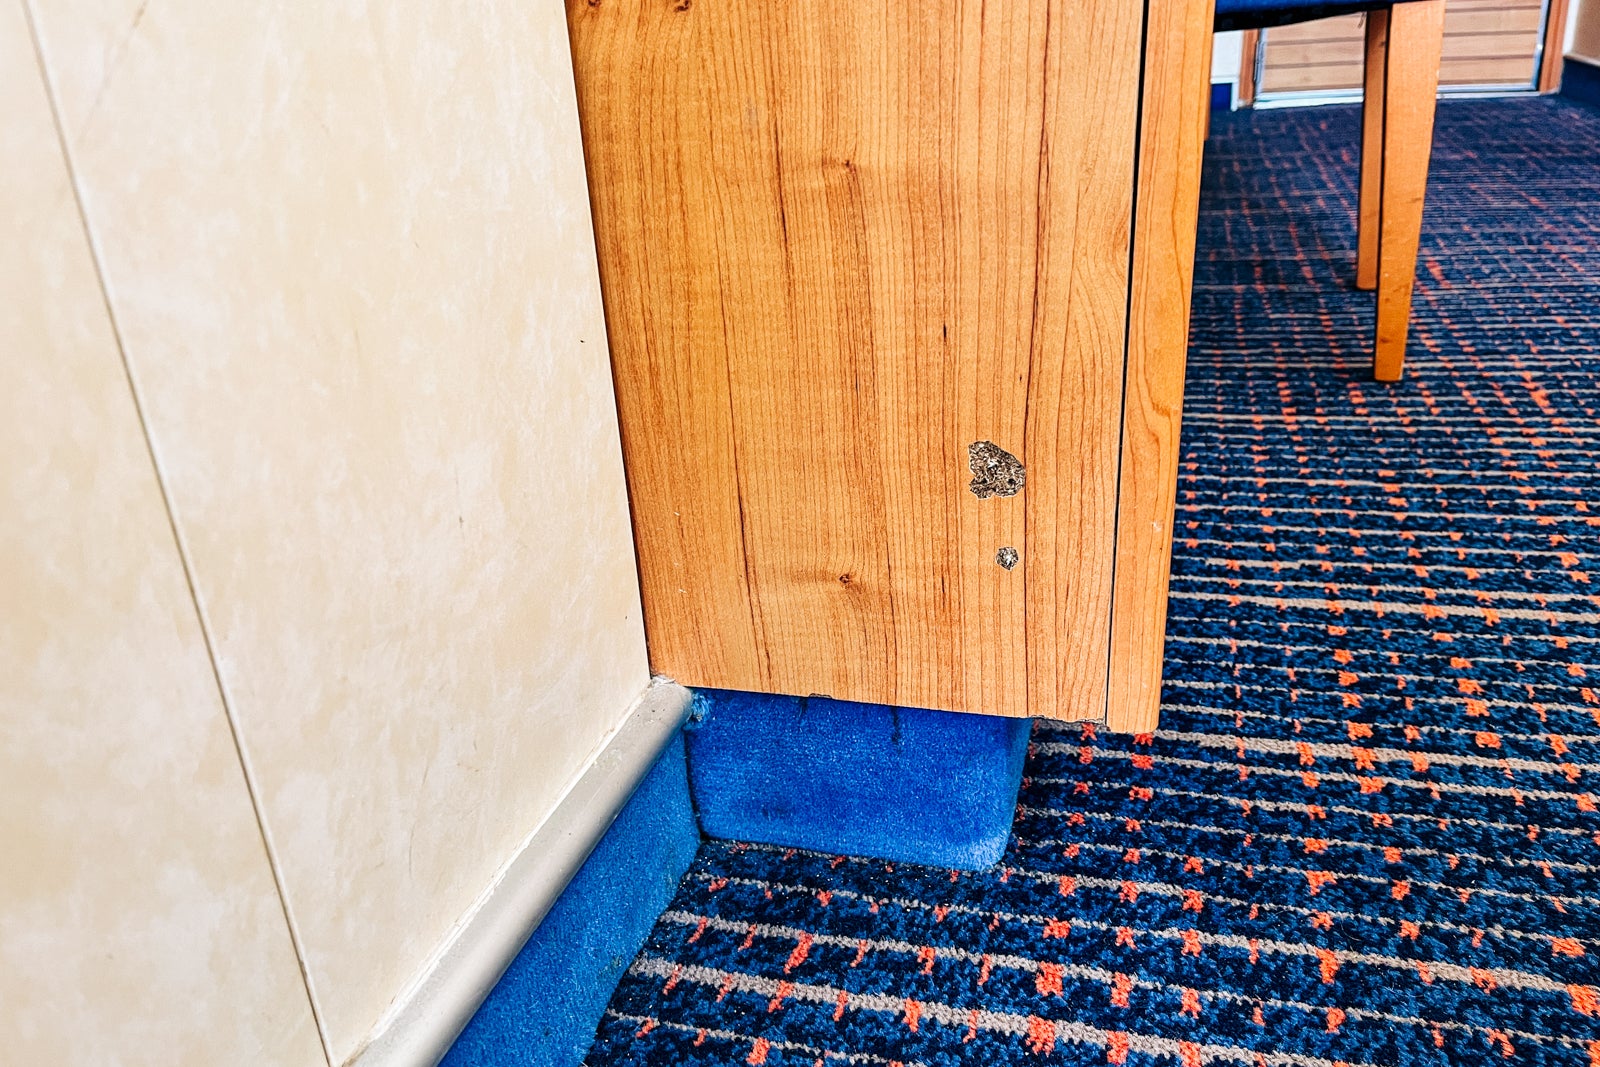 Signs of wear and tear in cabin on Carnival Sunshine